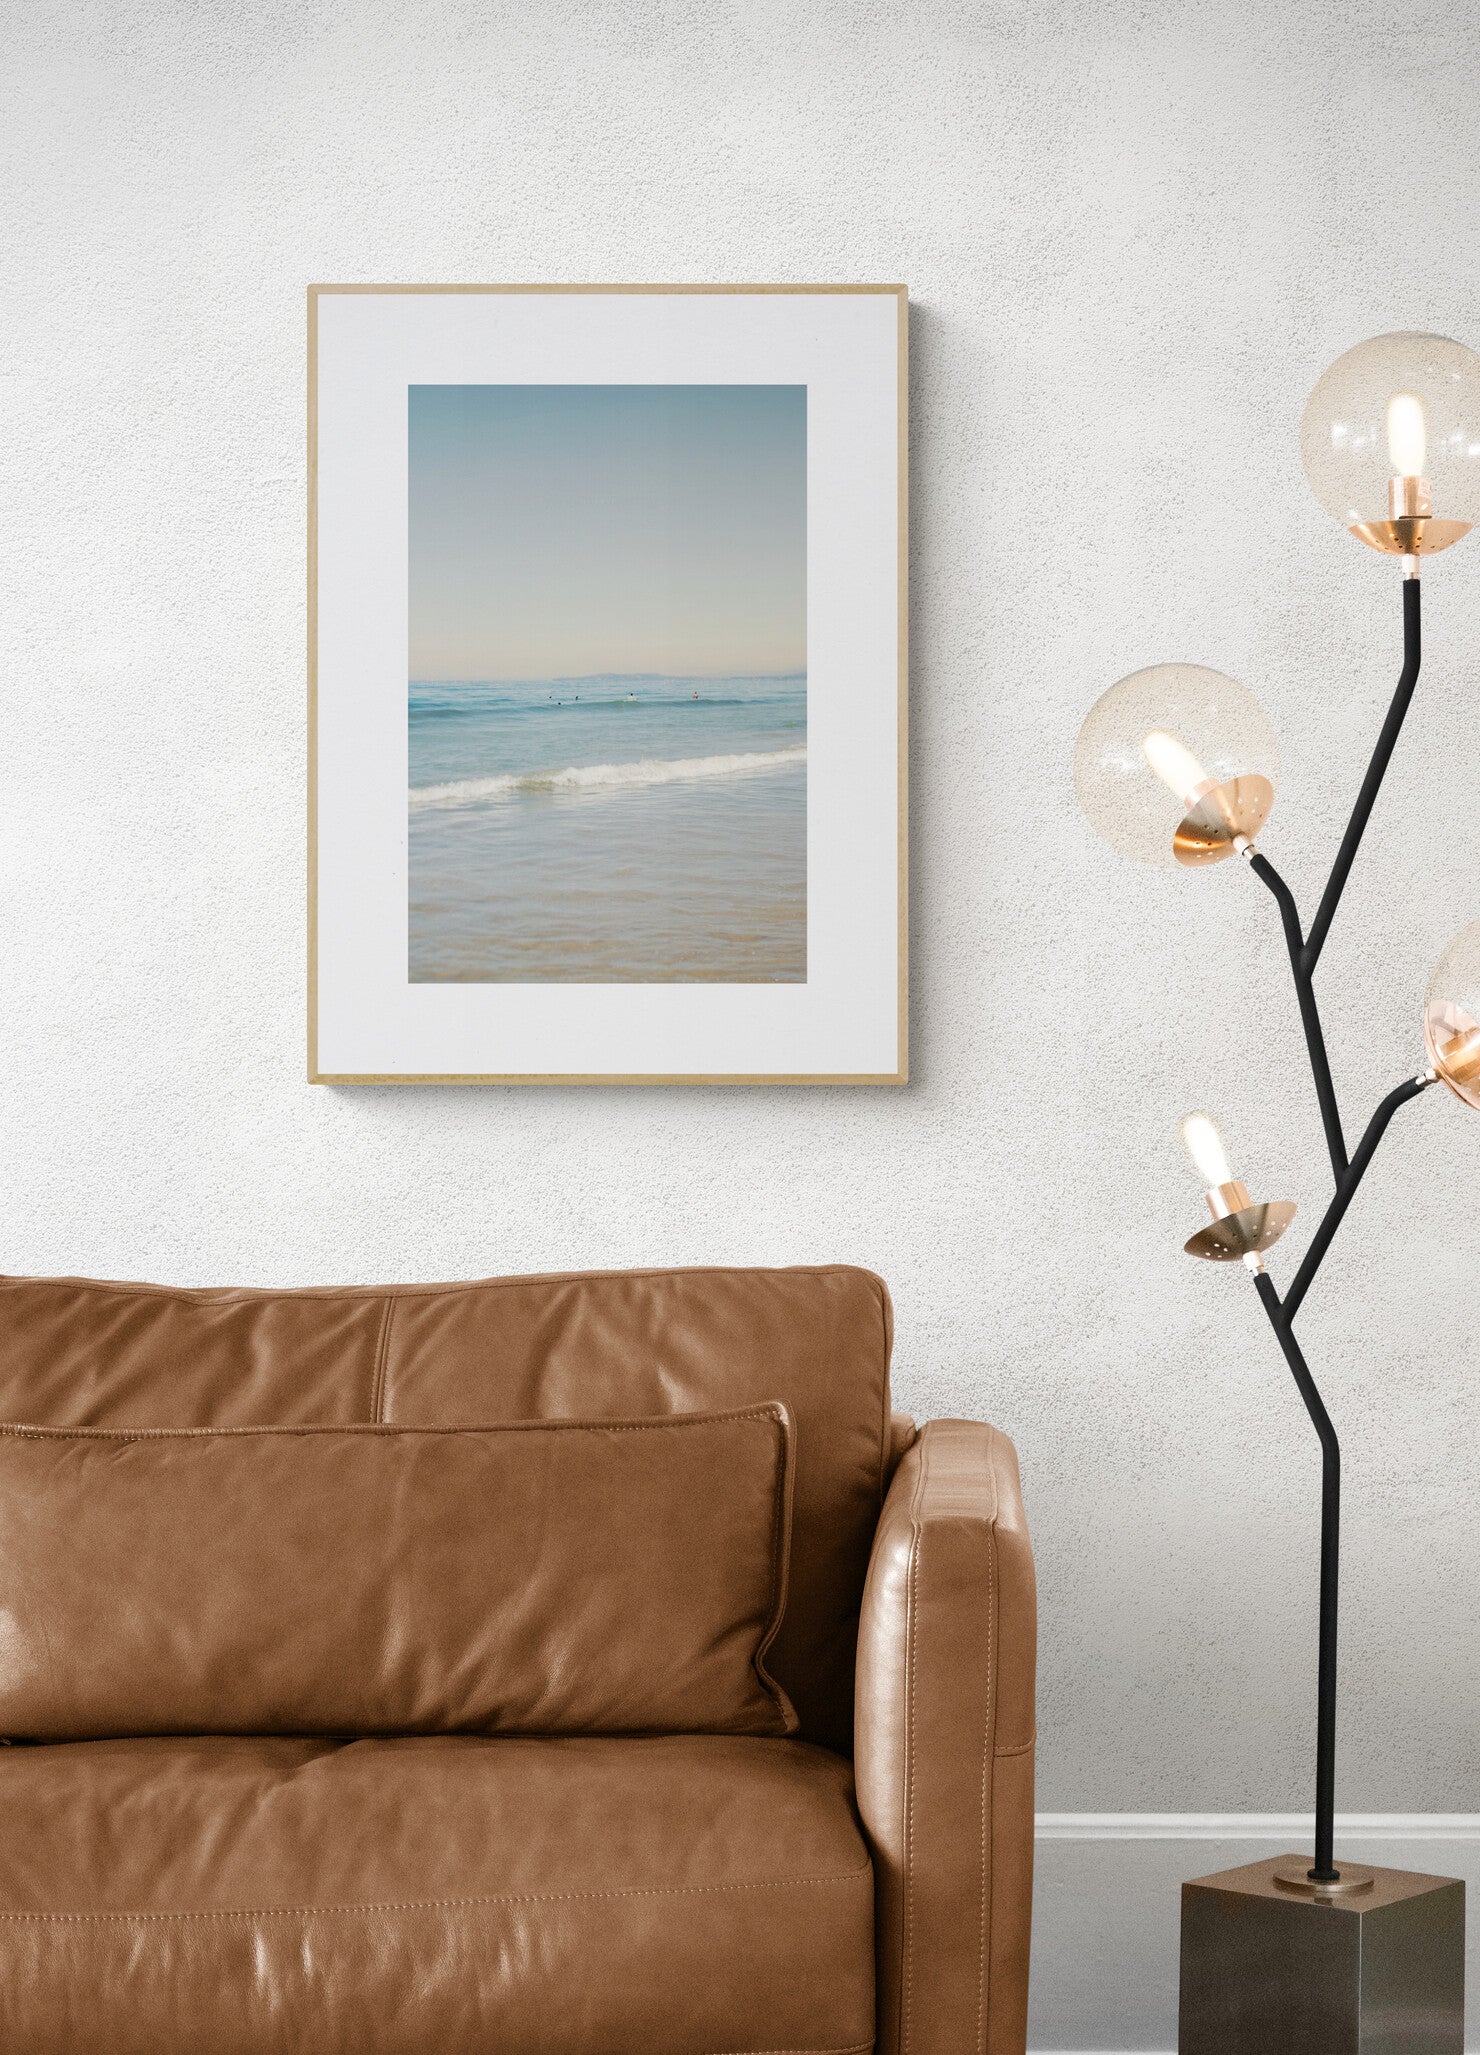 Carpinteria state beach california photograph as wall art in a leather couch in a living rooom